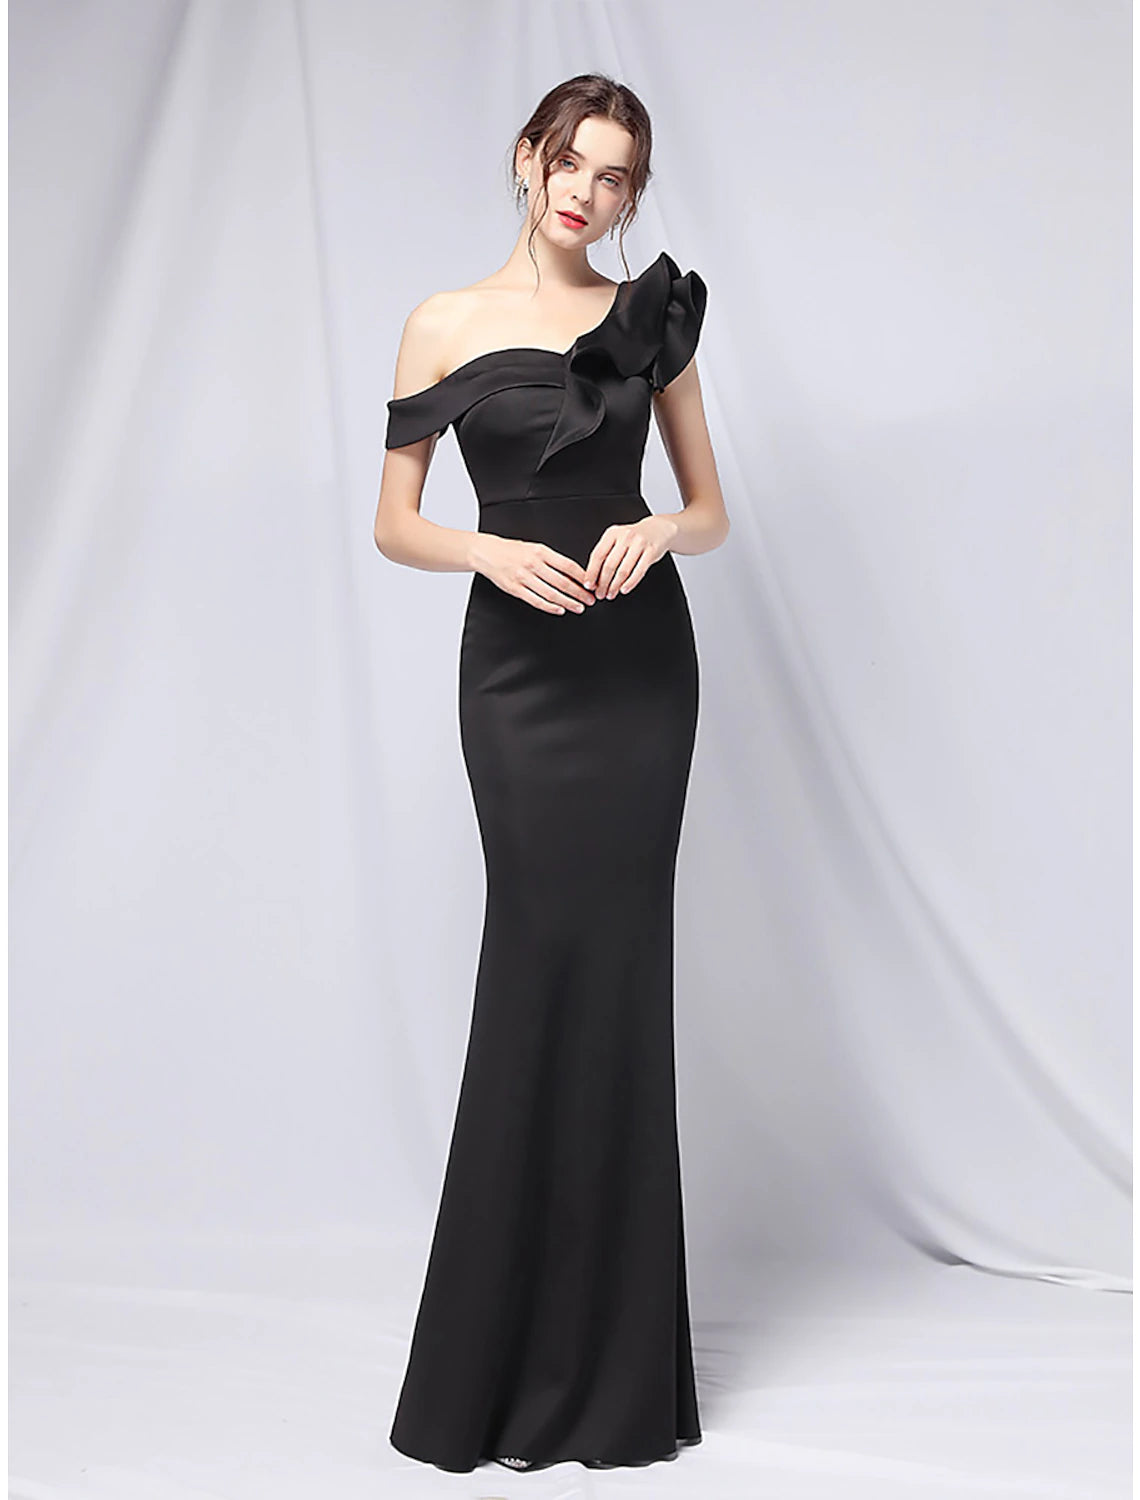 Mermaid / Trumpet Evening Gown Empire Dress Wedding Guest Formal Evening Floor Length Short Sleeve One Shoulder Stretch Satin with Ruffles